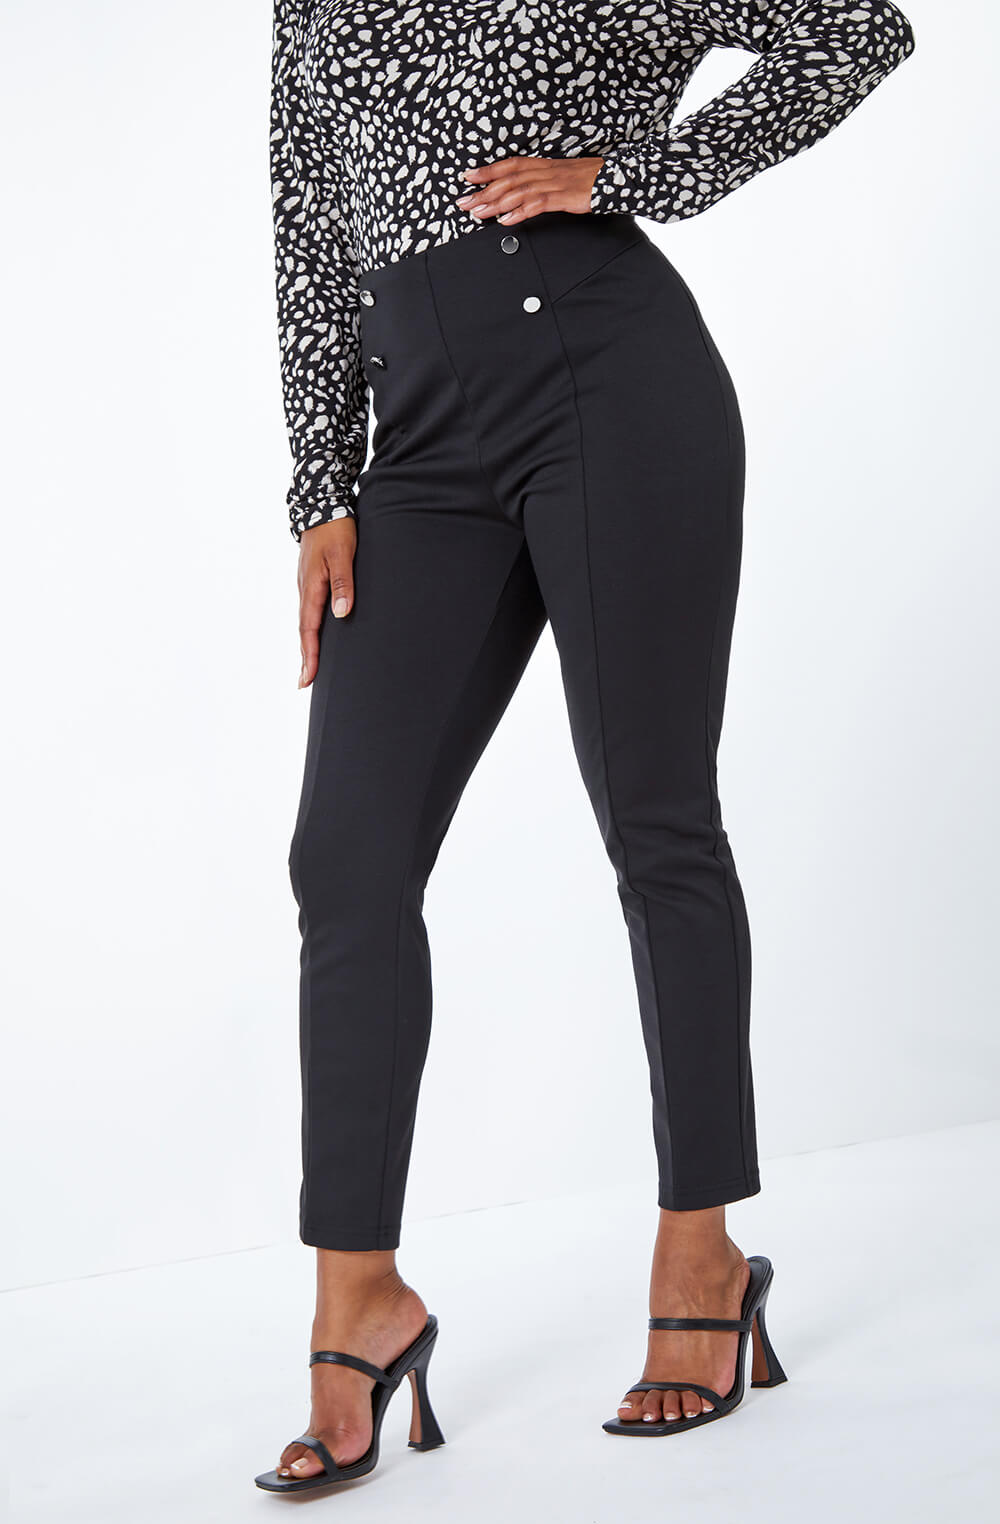 Black Petite Button Detail Stretch Trouser, Image 5 of 5